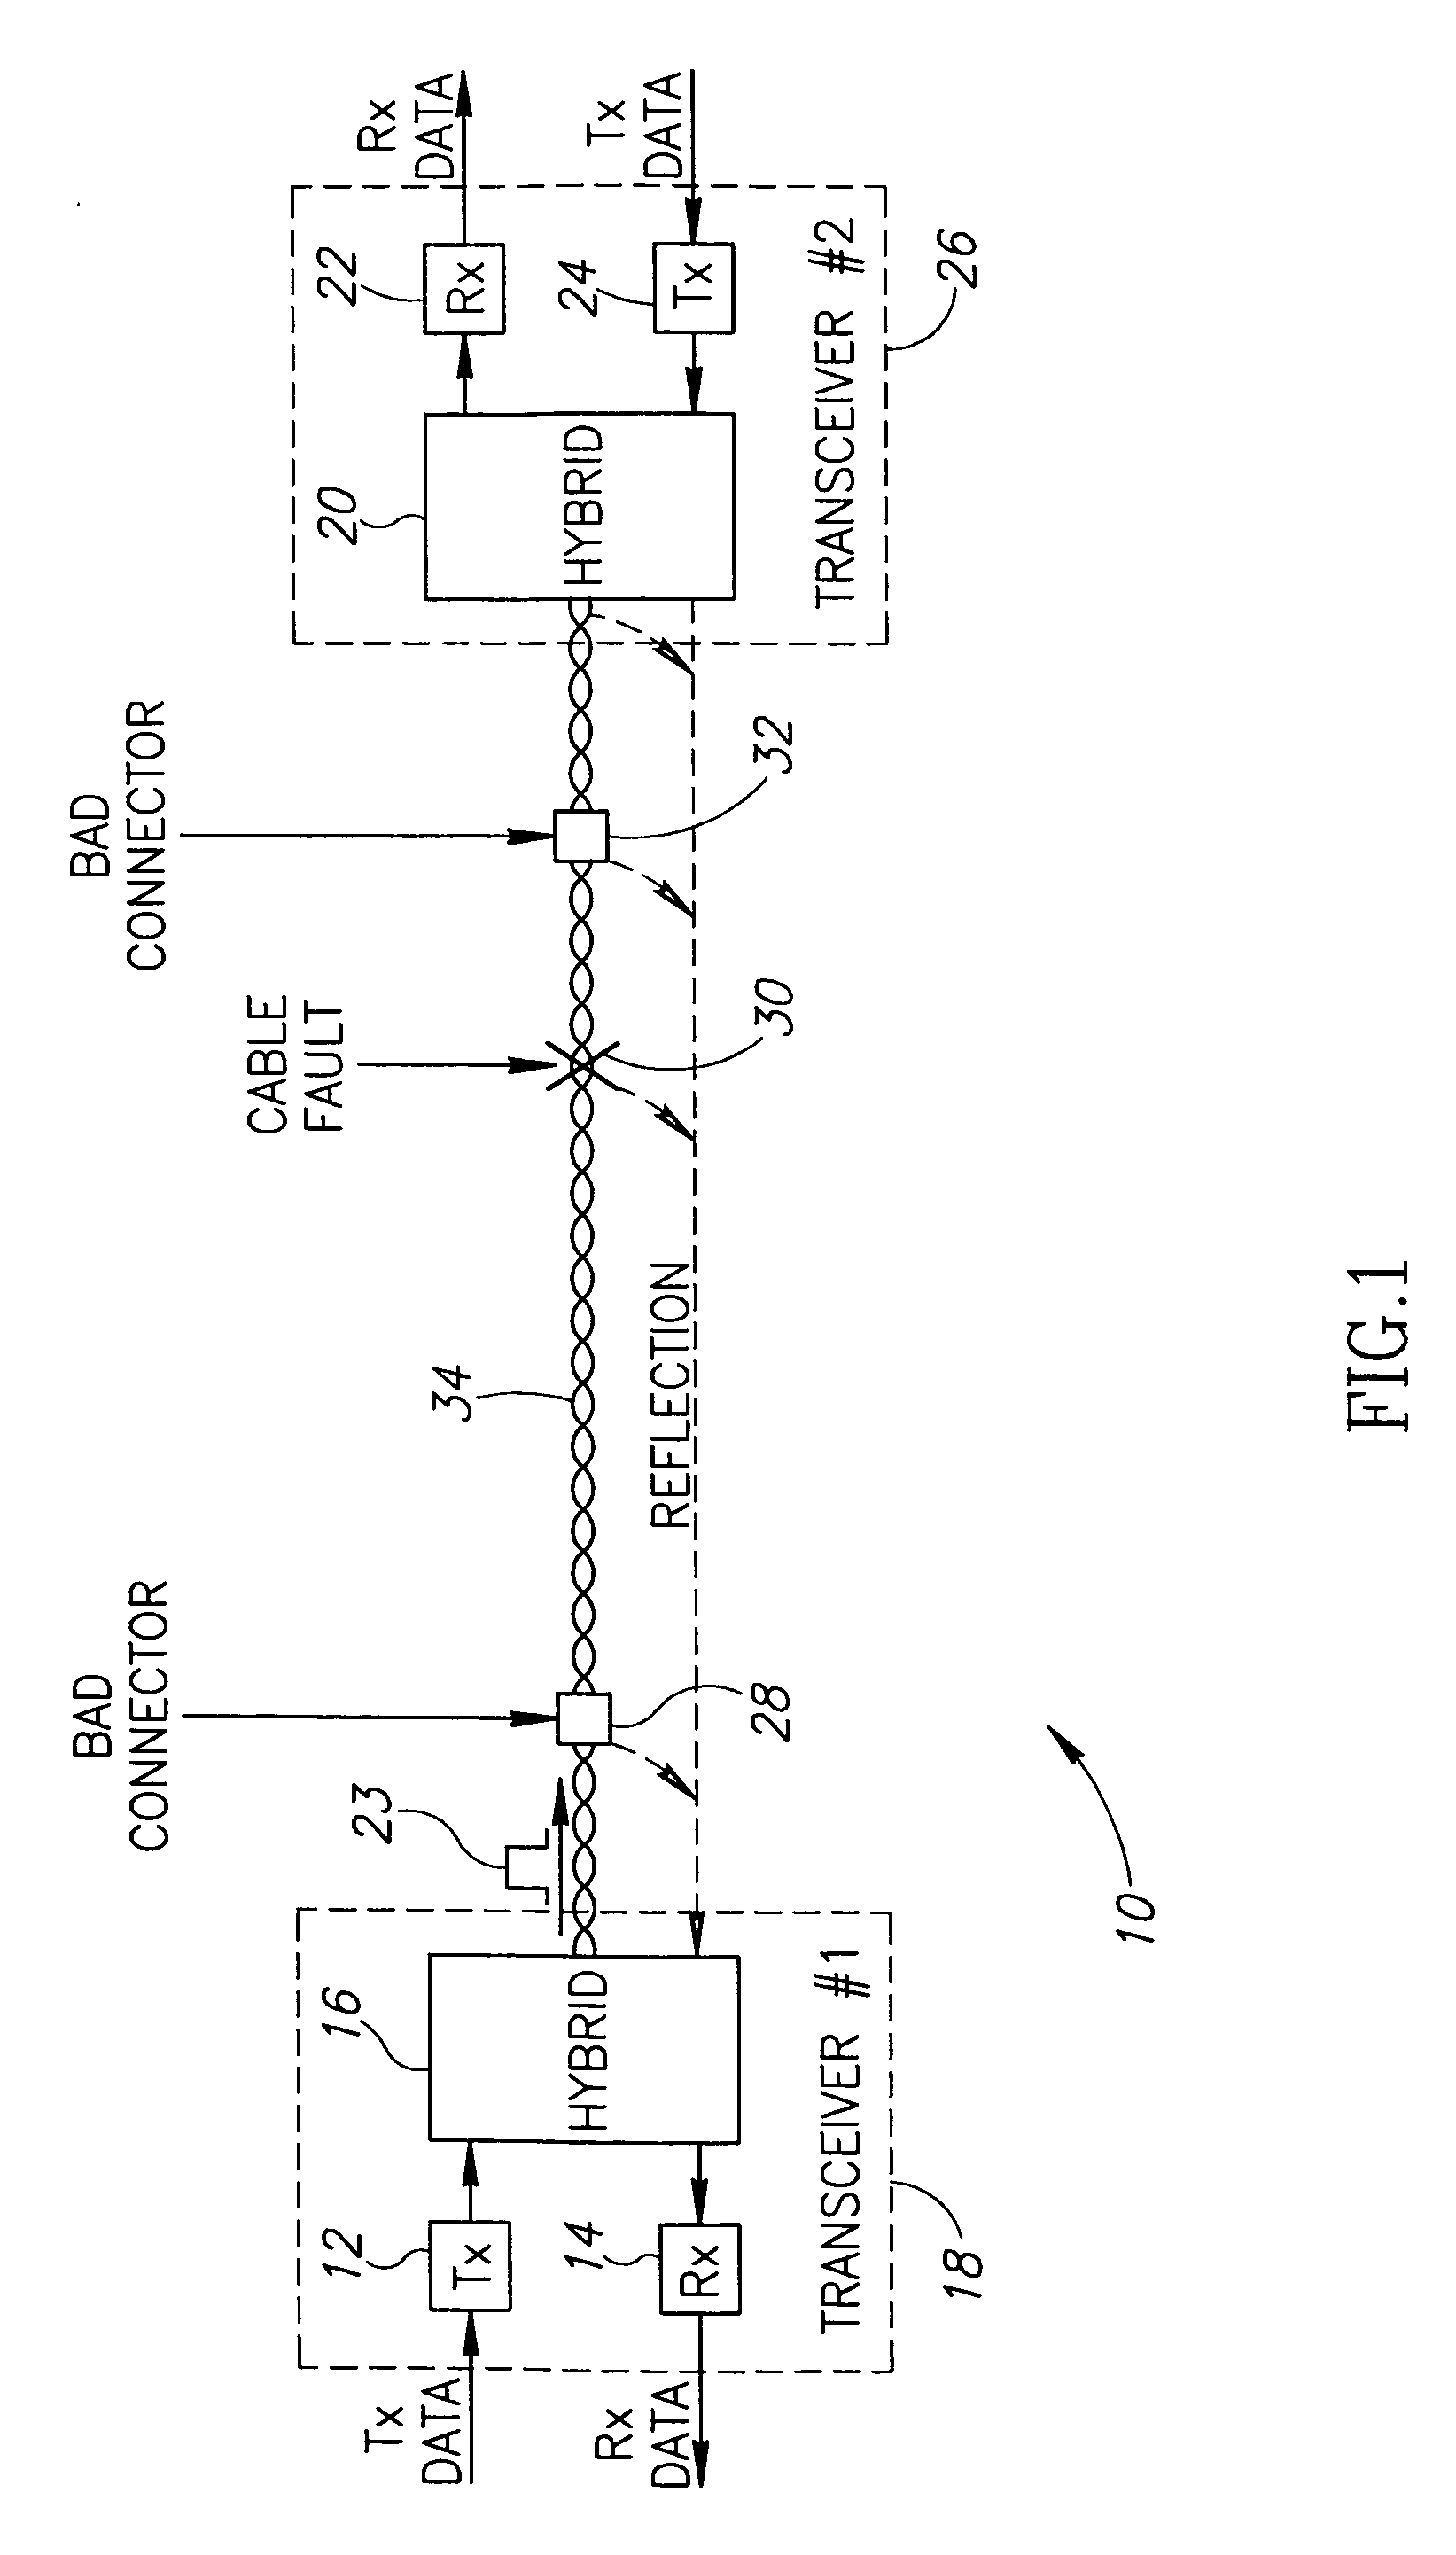 Apparatus for and method of cable diagnostics utilizing time domain reflectometry